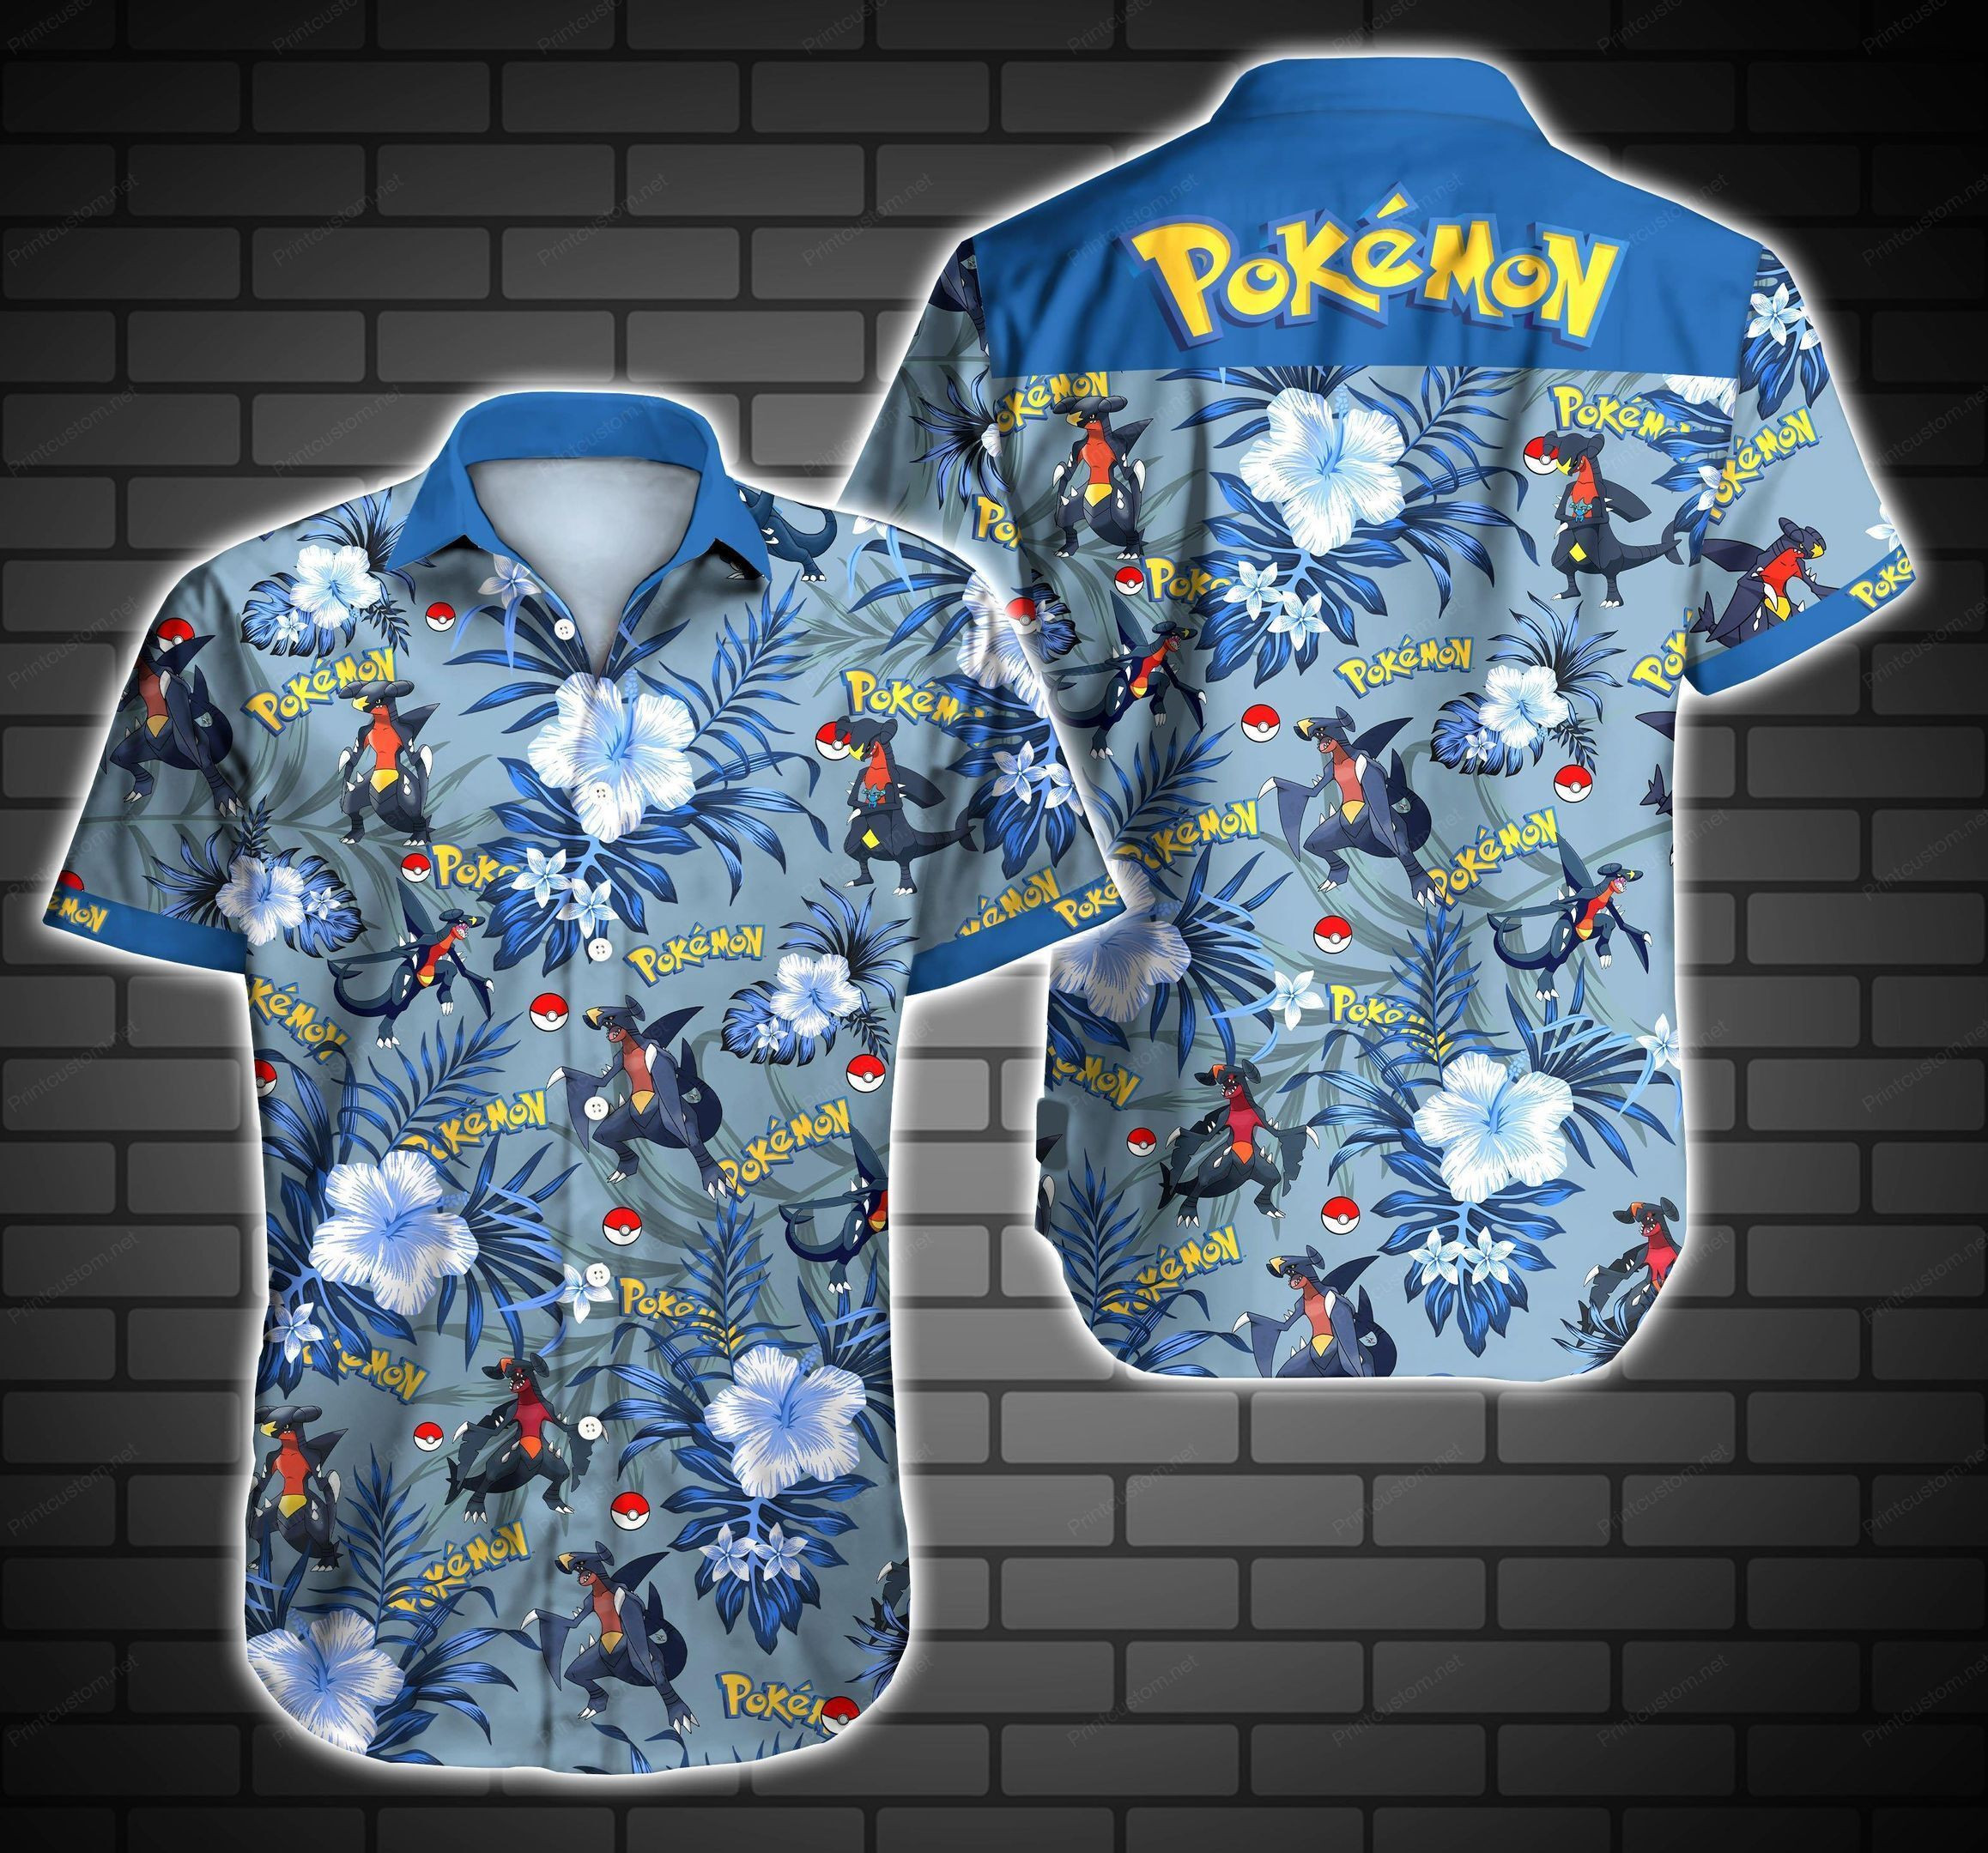 Choose from the many styles and colors to find your favorite Hawaiian Shirt below 31